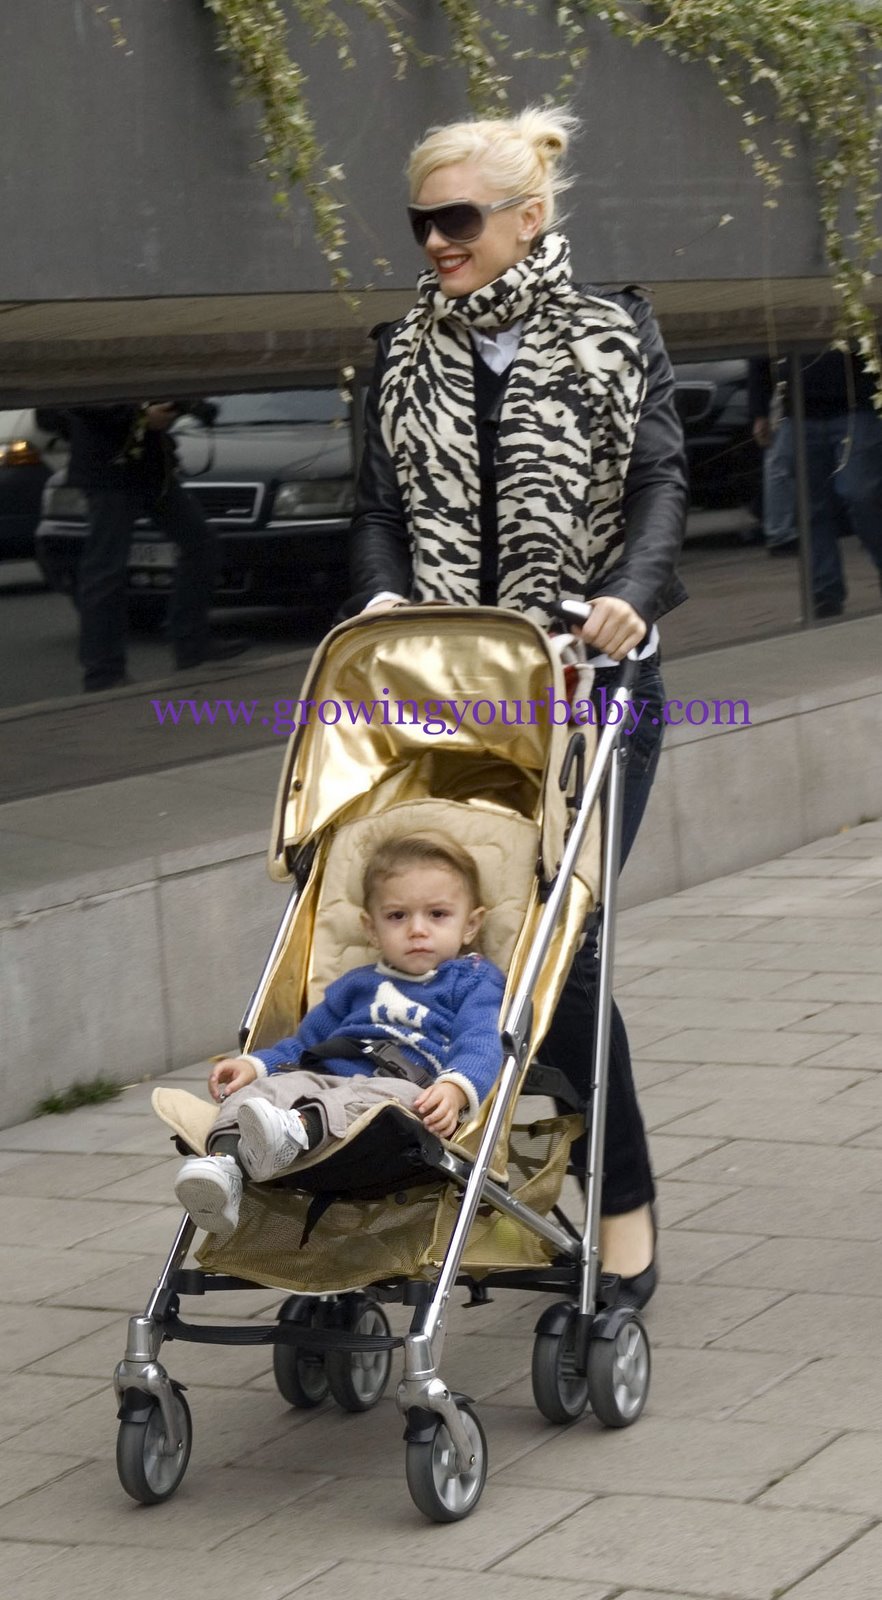 [gwen+and+kingston+gold+stroller]